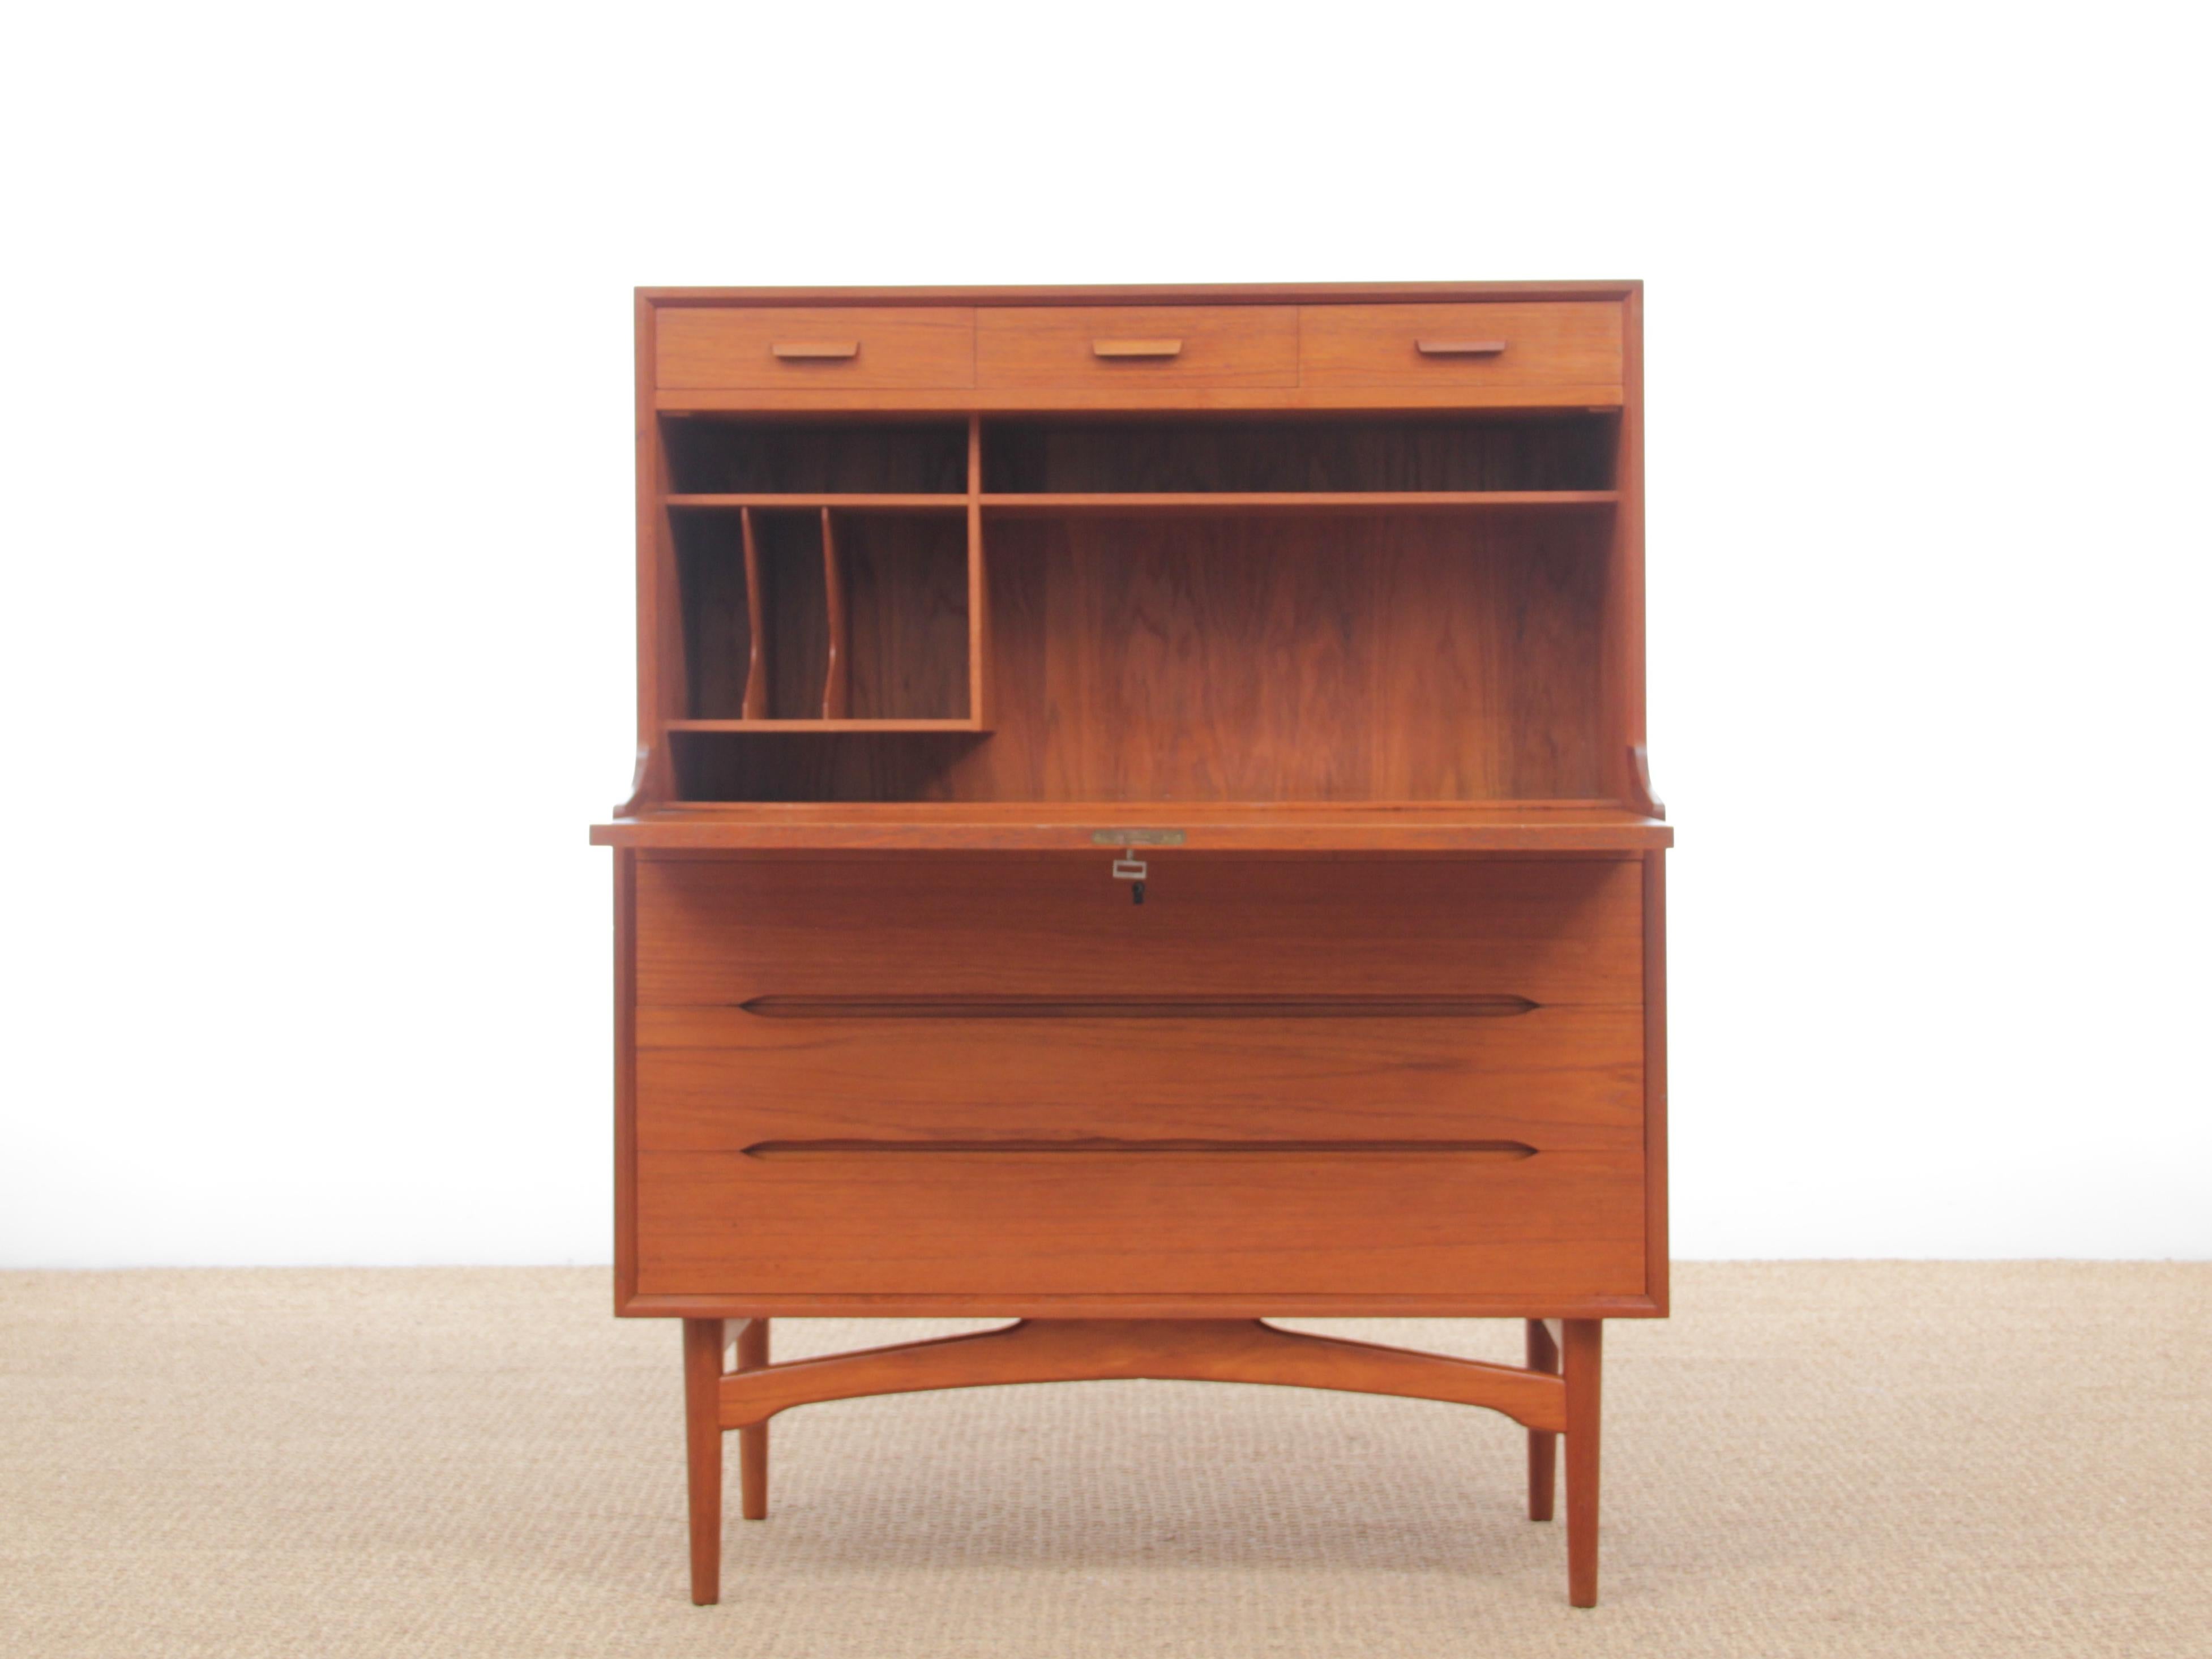 Mid-Century Modern Danish secretary in teak by Arne Wahl Iversen. Referenced by the Design Museum Danmark under number RP17808. Comes with traces of wear and small scratches.